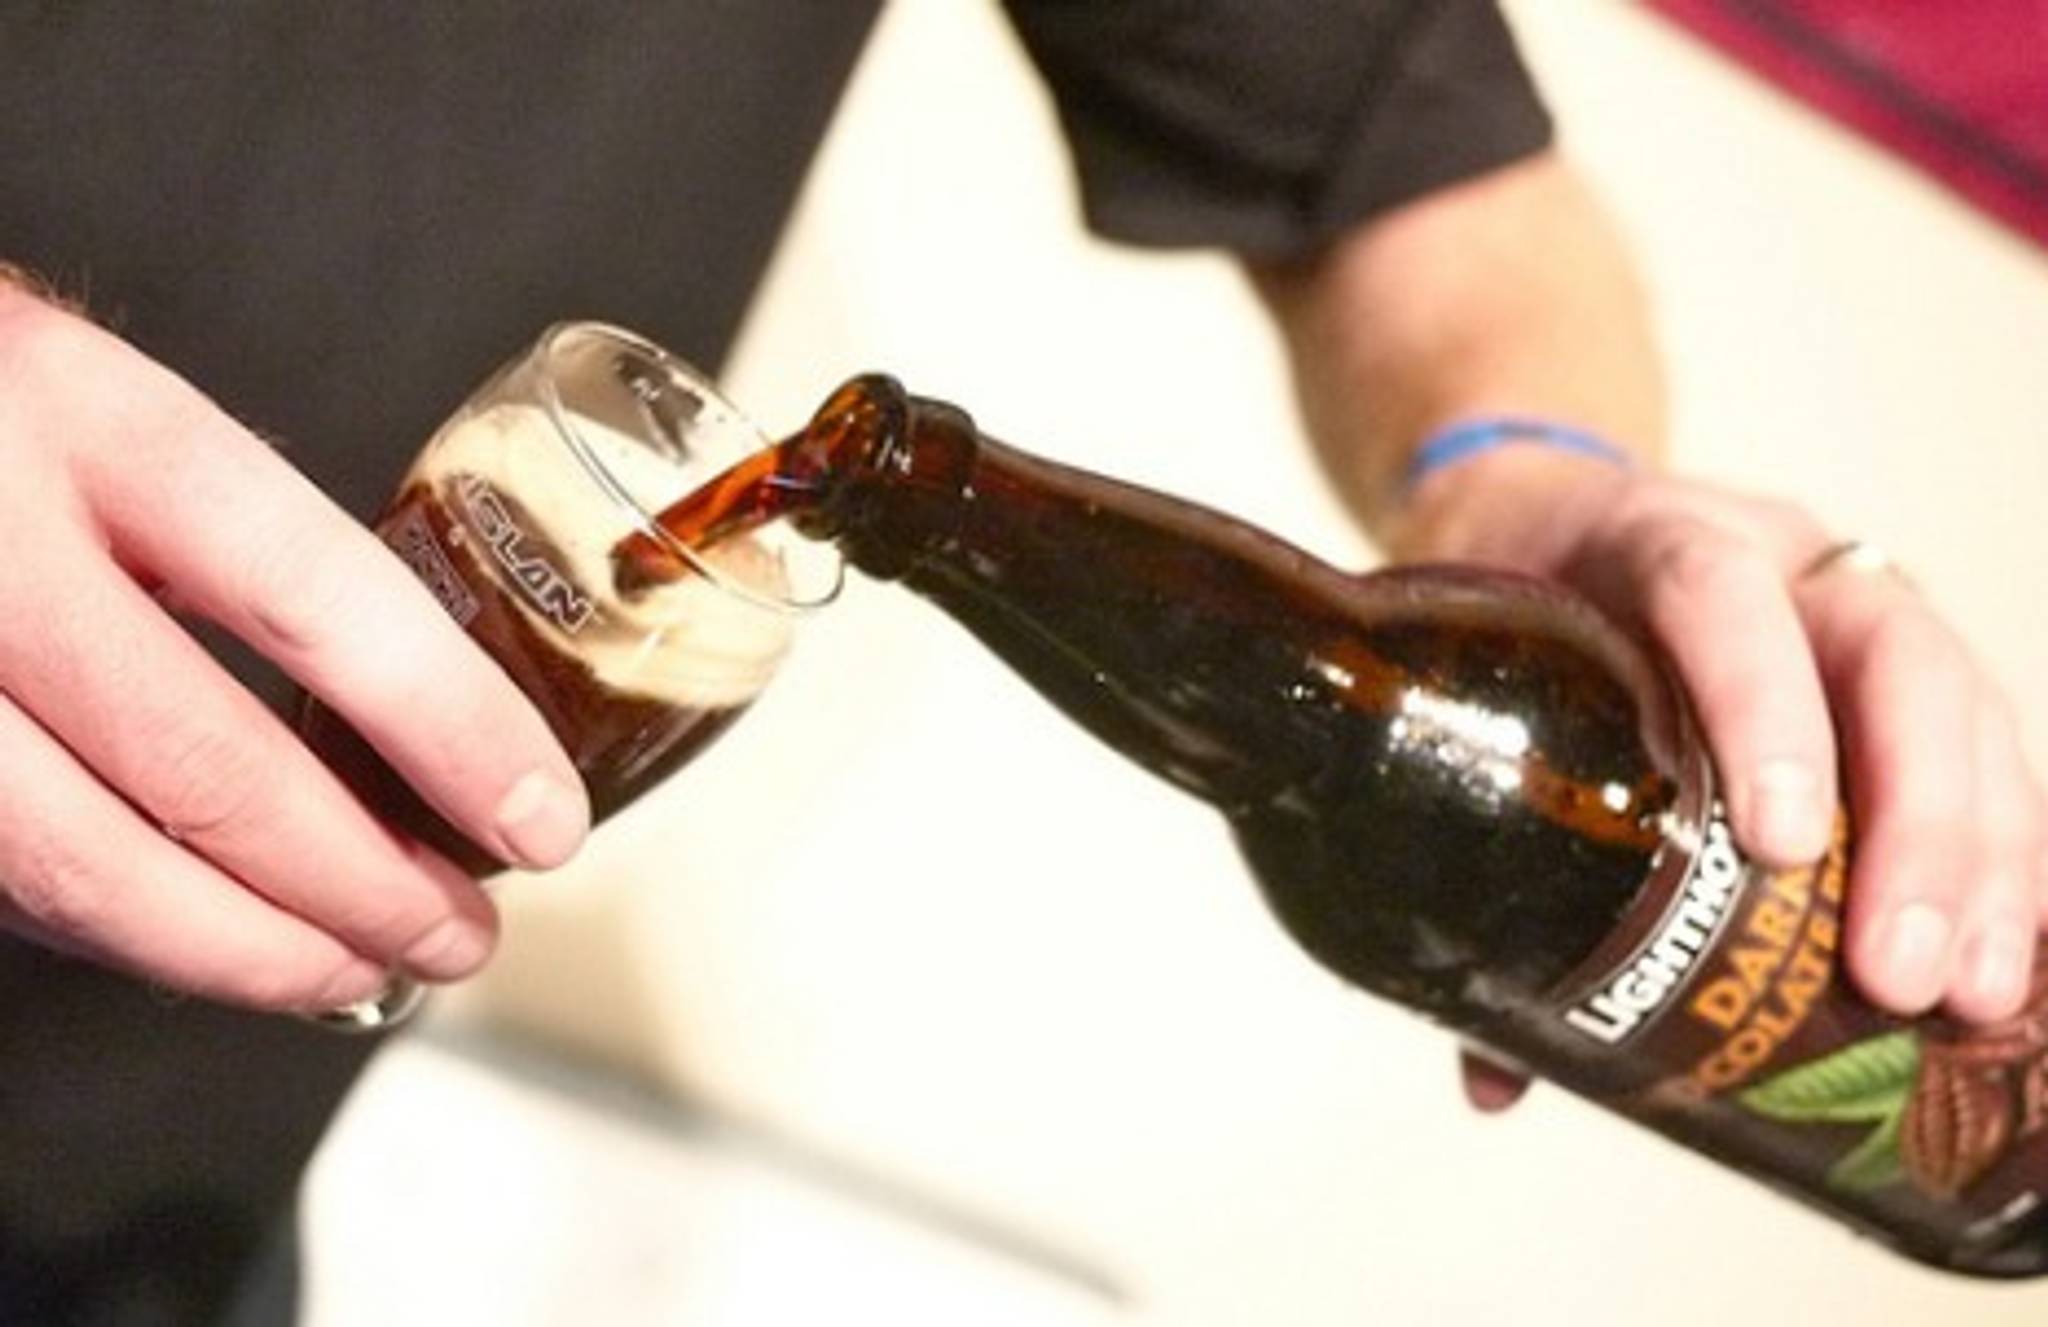 Is that really craft beer you’re drinking?